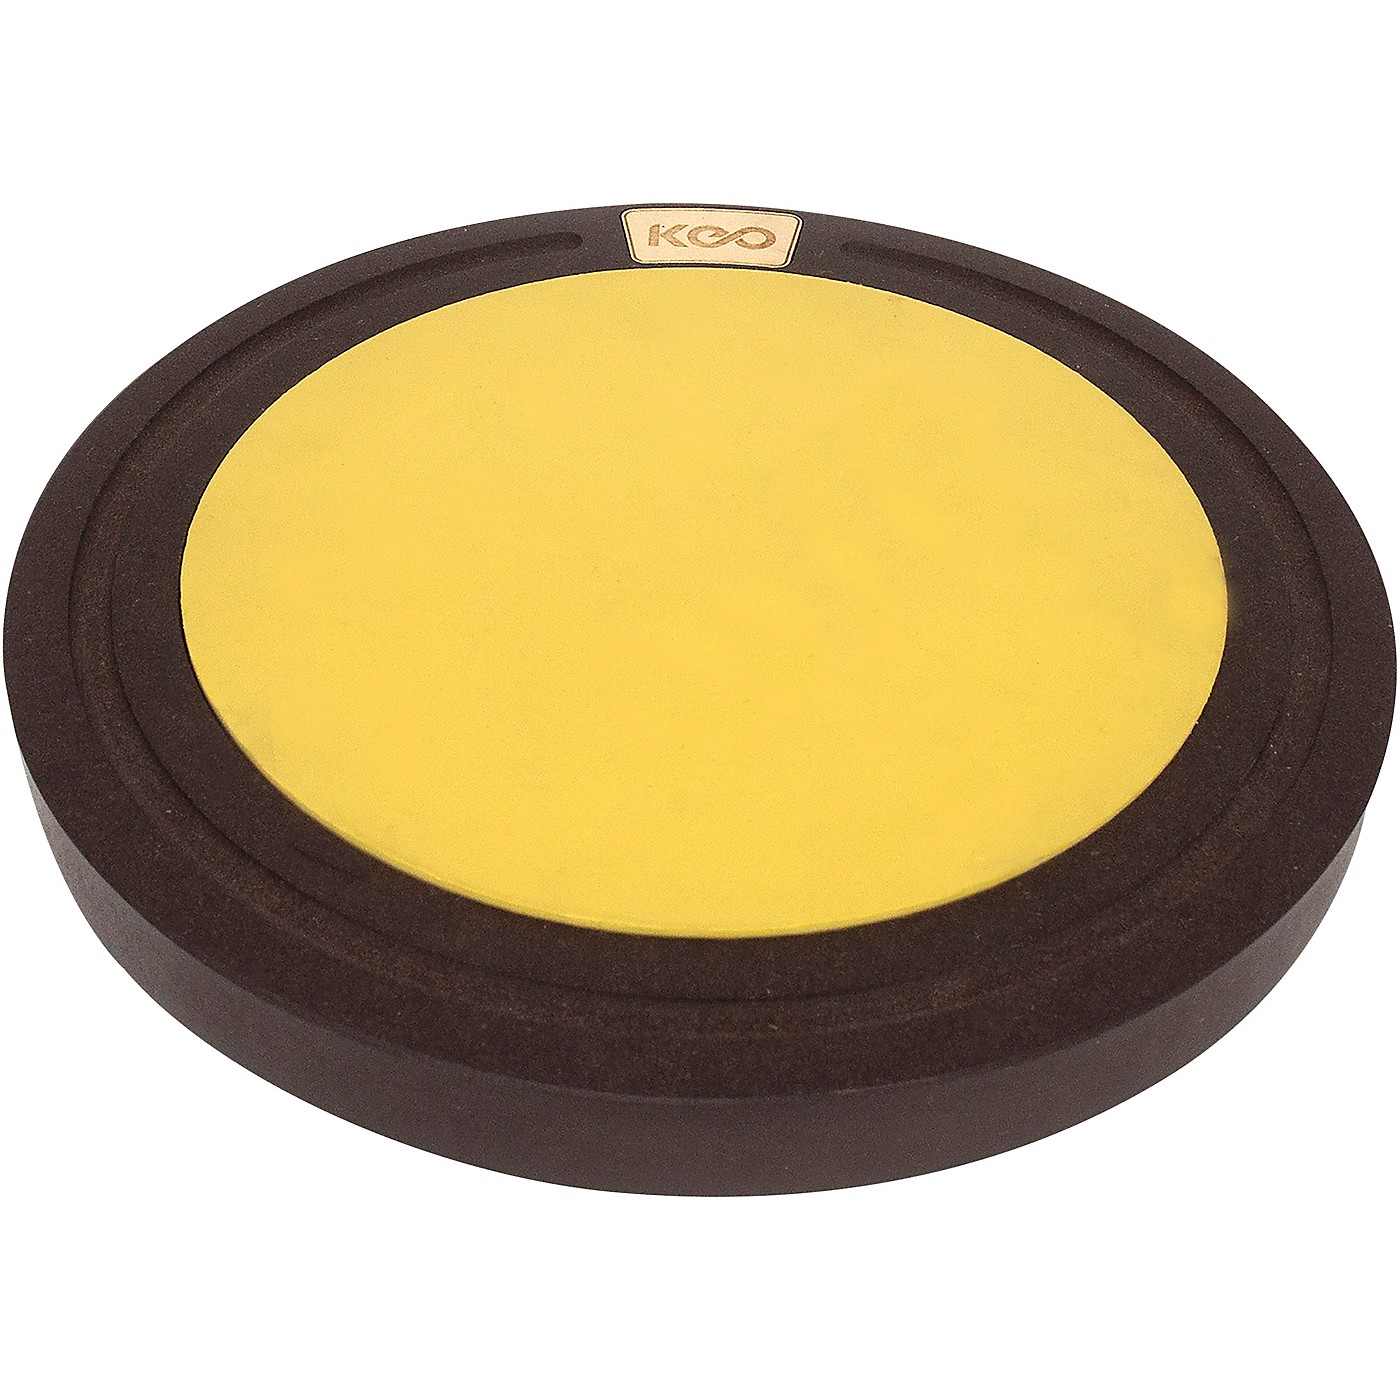 KEO Percussion 12 In. Practice Pad thumbnail